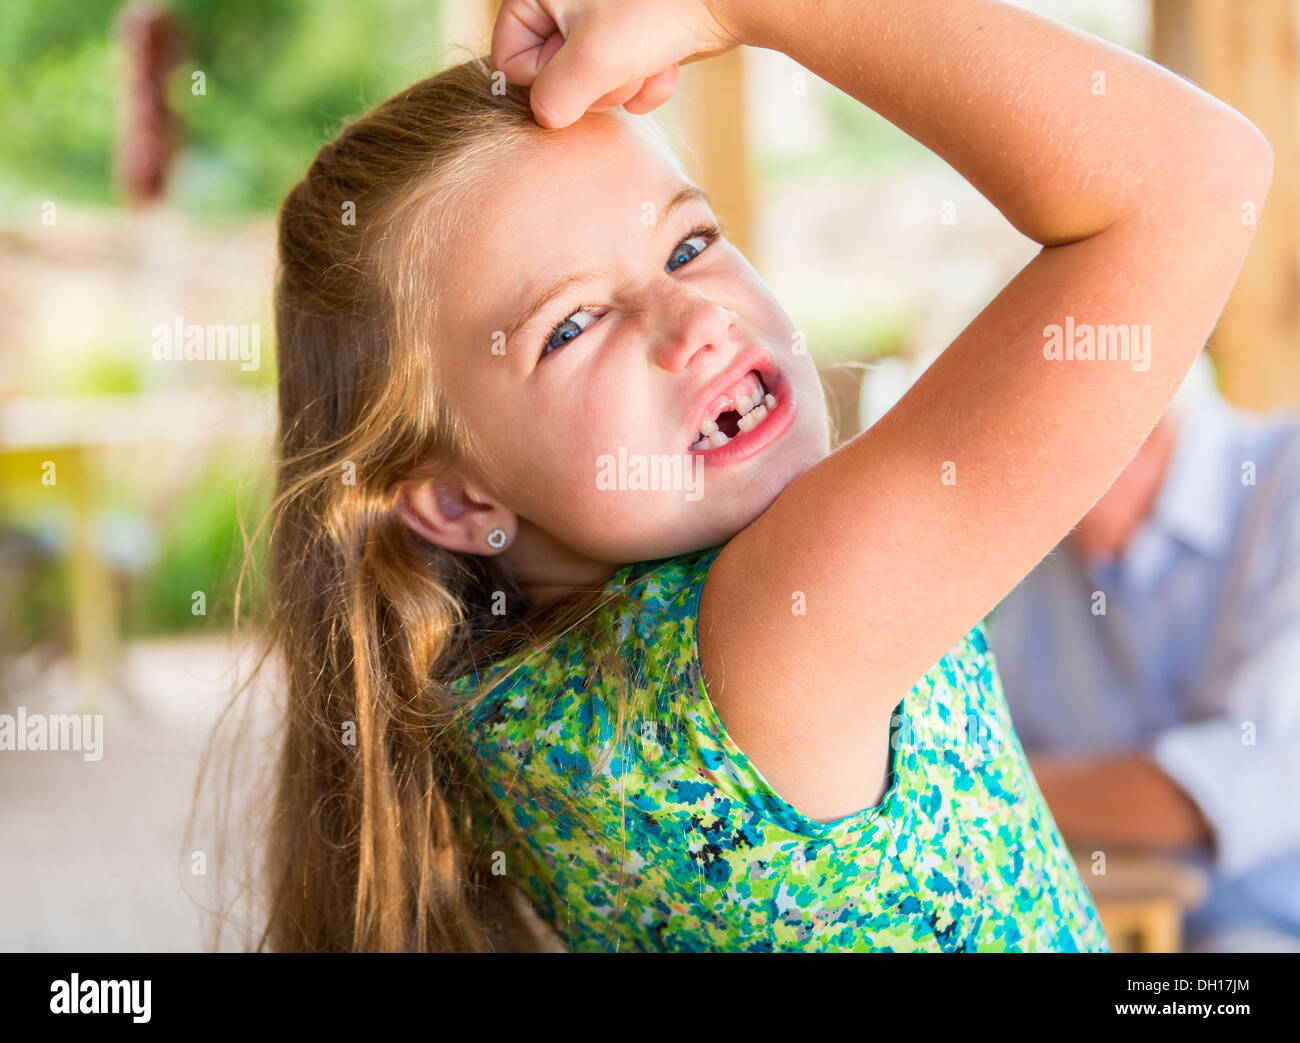 Caucasian girl showing missing teeth and flexing biceps Stock Photo